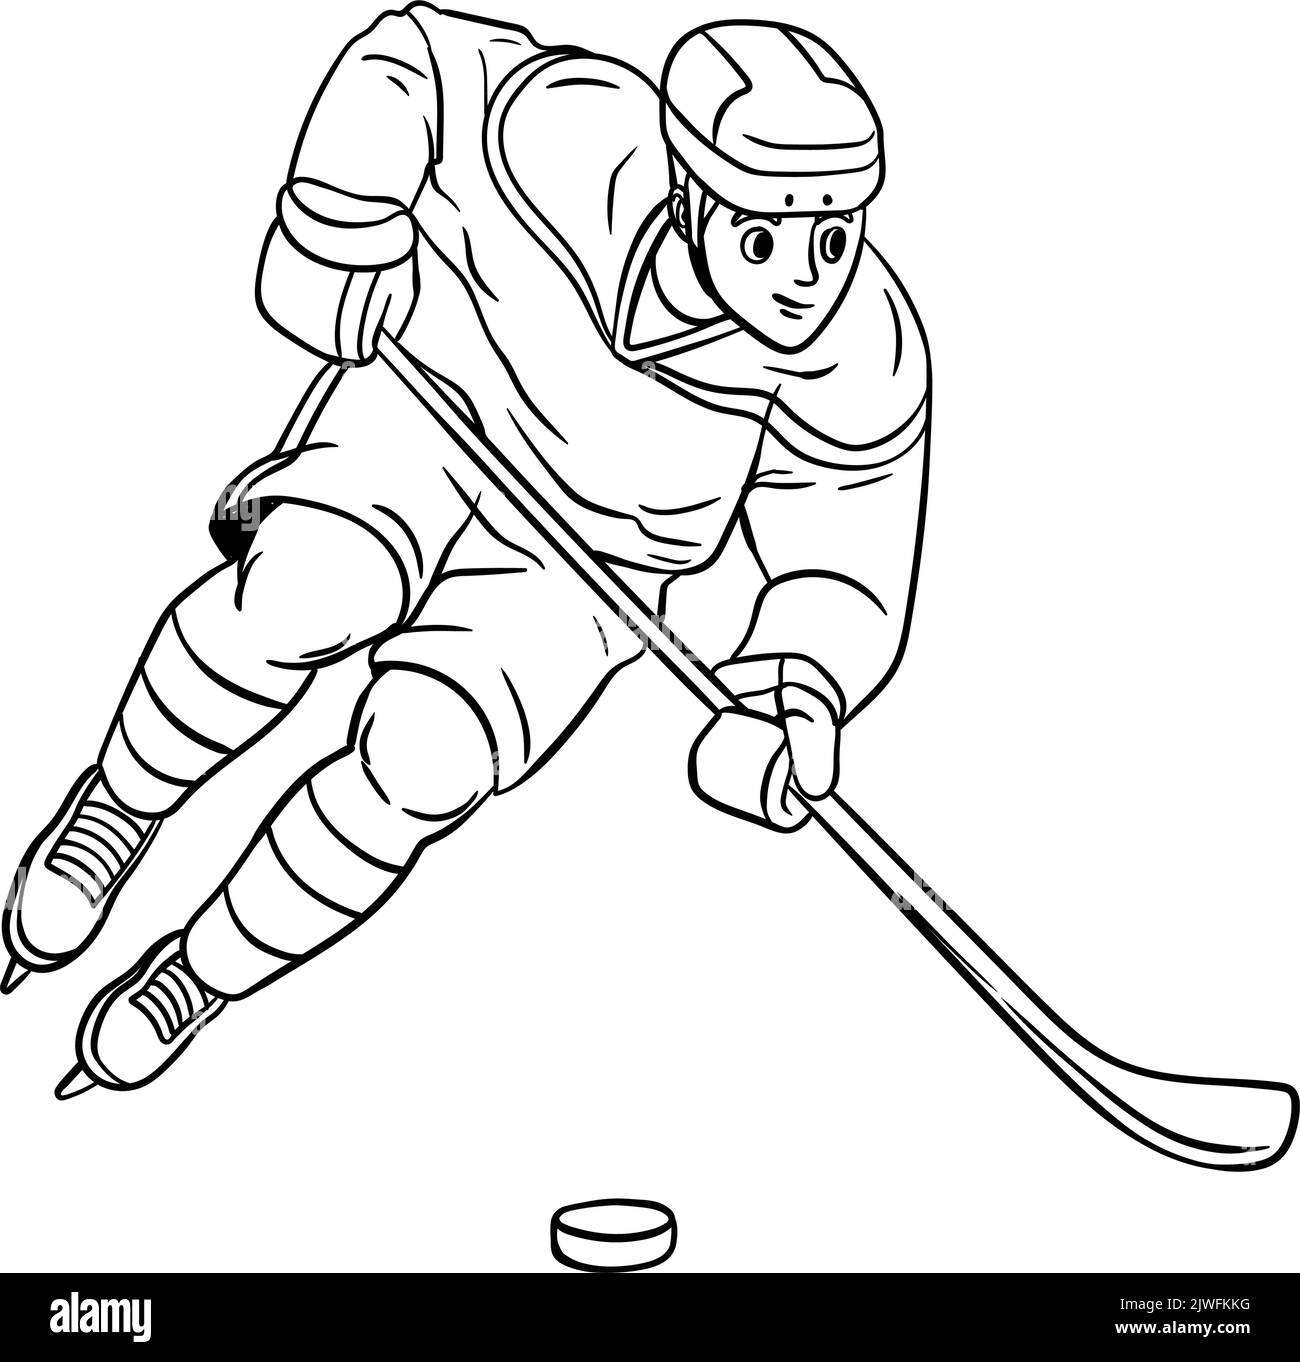 Ice hockey Isolated Coloring Page for Kids Stock Vector Image & Art - Alamy